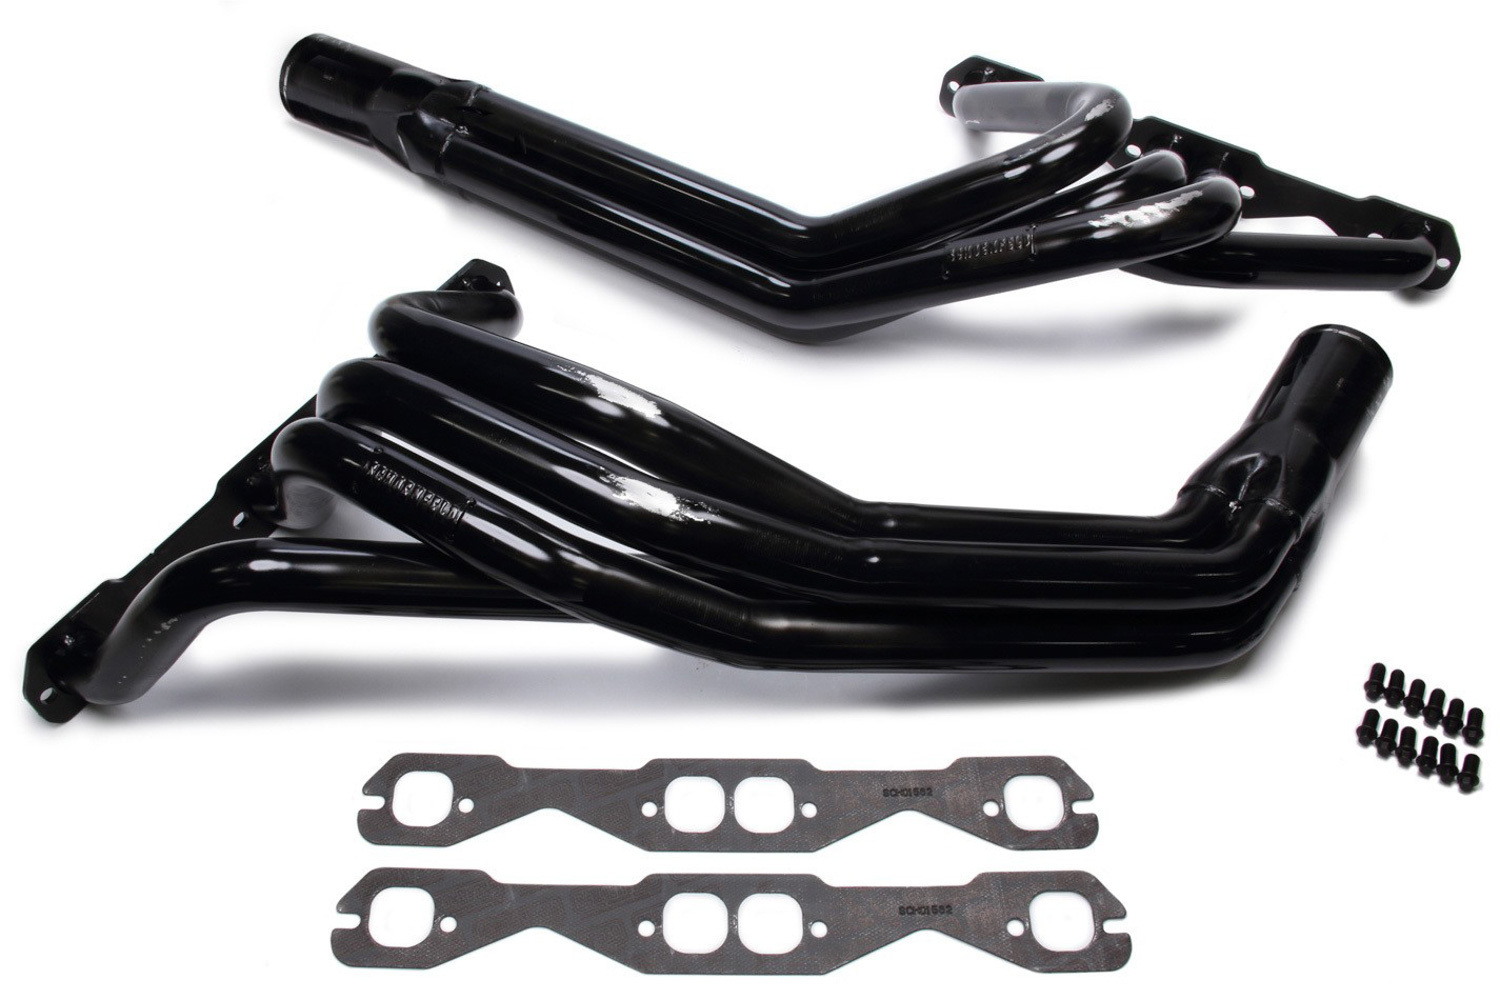 Schoenfeld Headers 1155LV3CM-3 - Headers, IMCA Modified, 1-5/8 to 1-7/8 in Primary, 3 in Collector, Steel, Black Paint, Small Block Chevy, Kit